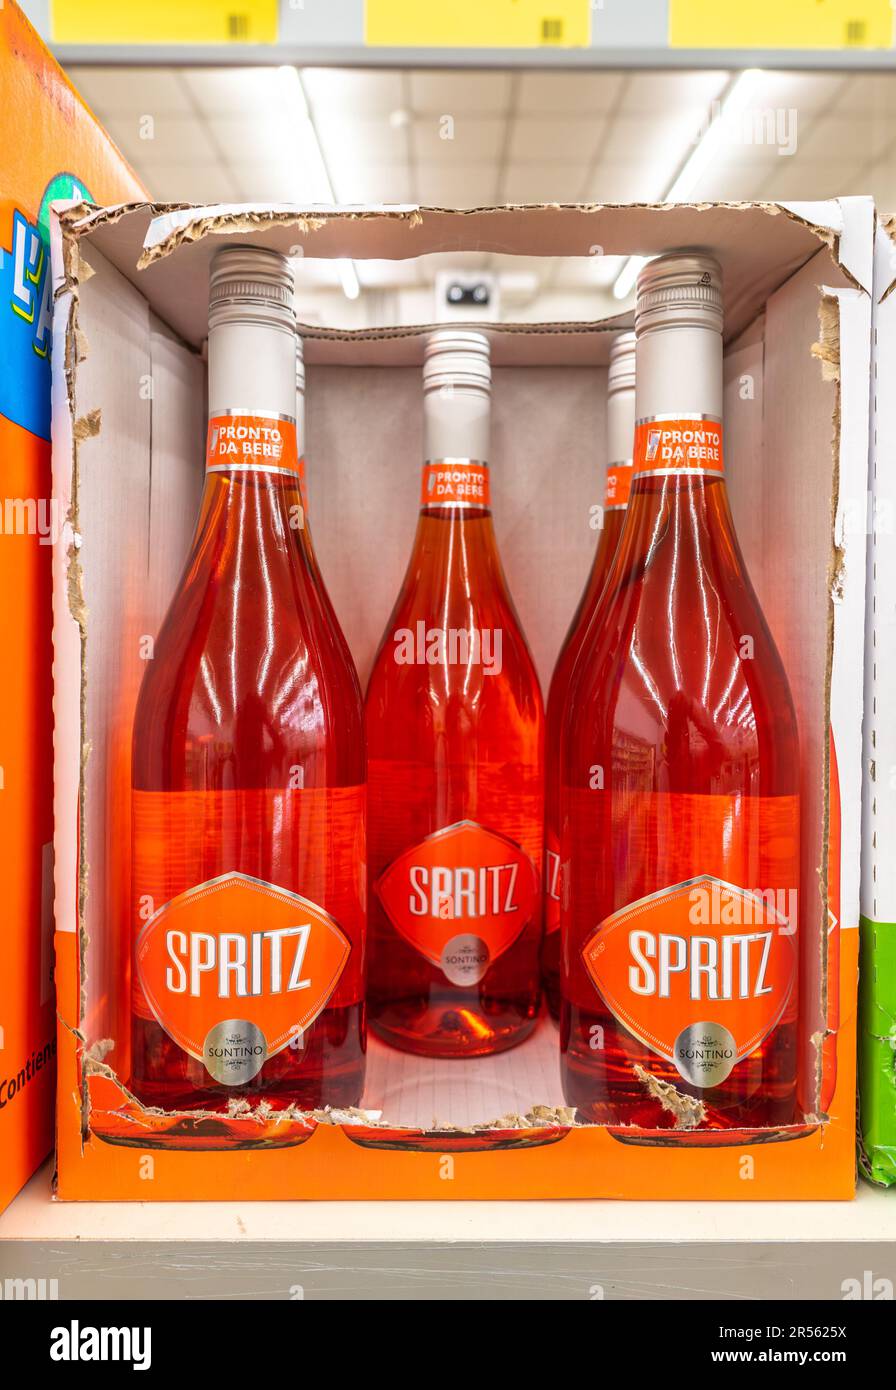 Italy - May 21, 2023: Bottles of ready-to-drink Spritz cocktails displayed in cardboard boxes for sale on Italian discount store shelf at affordable p Stock Photo